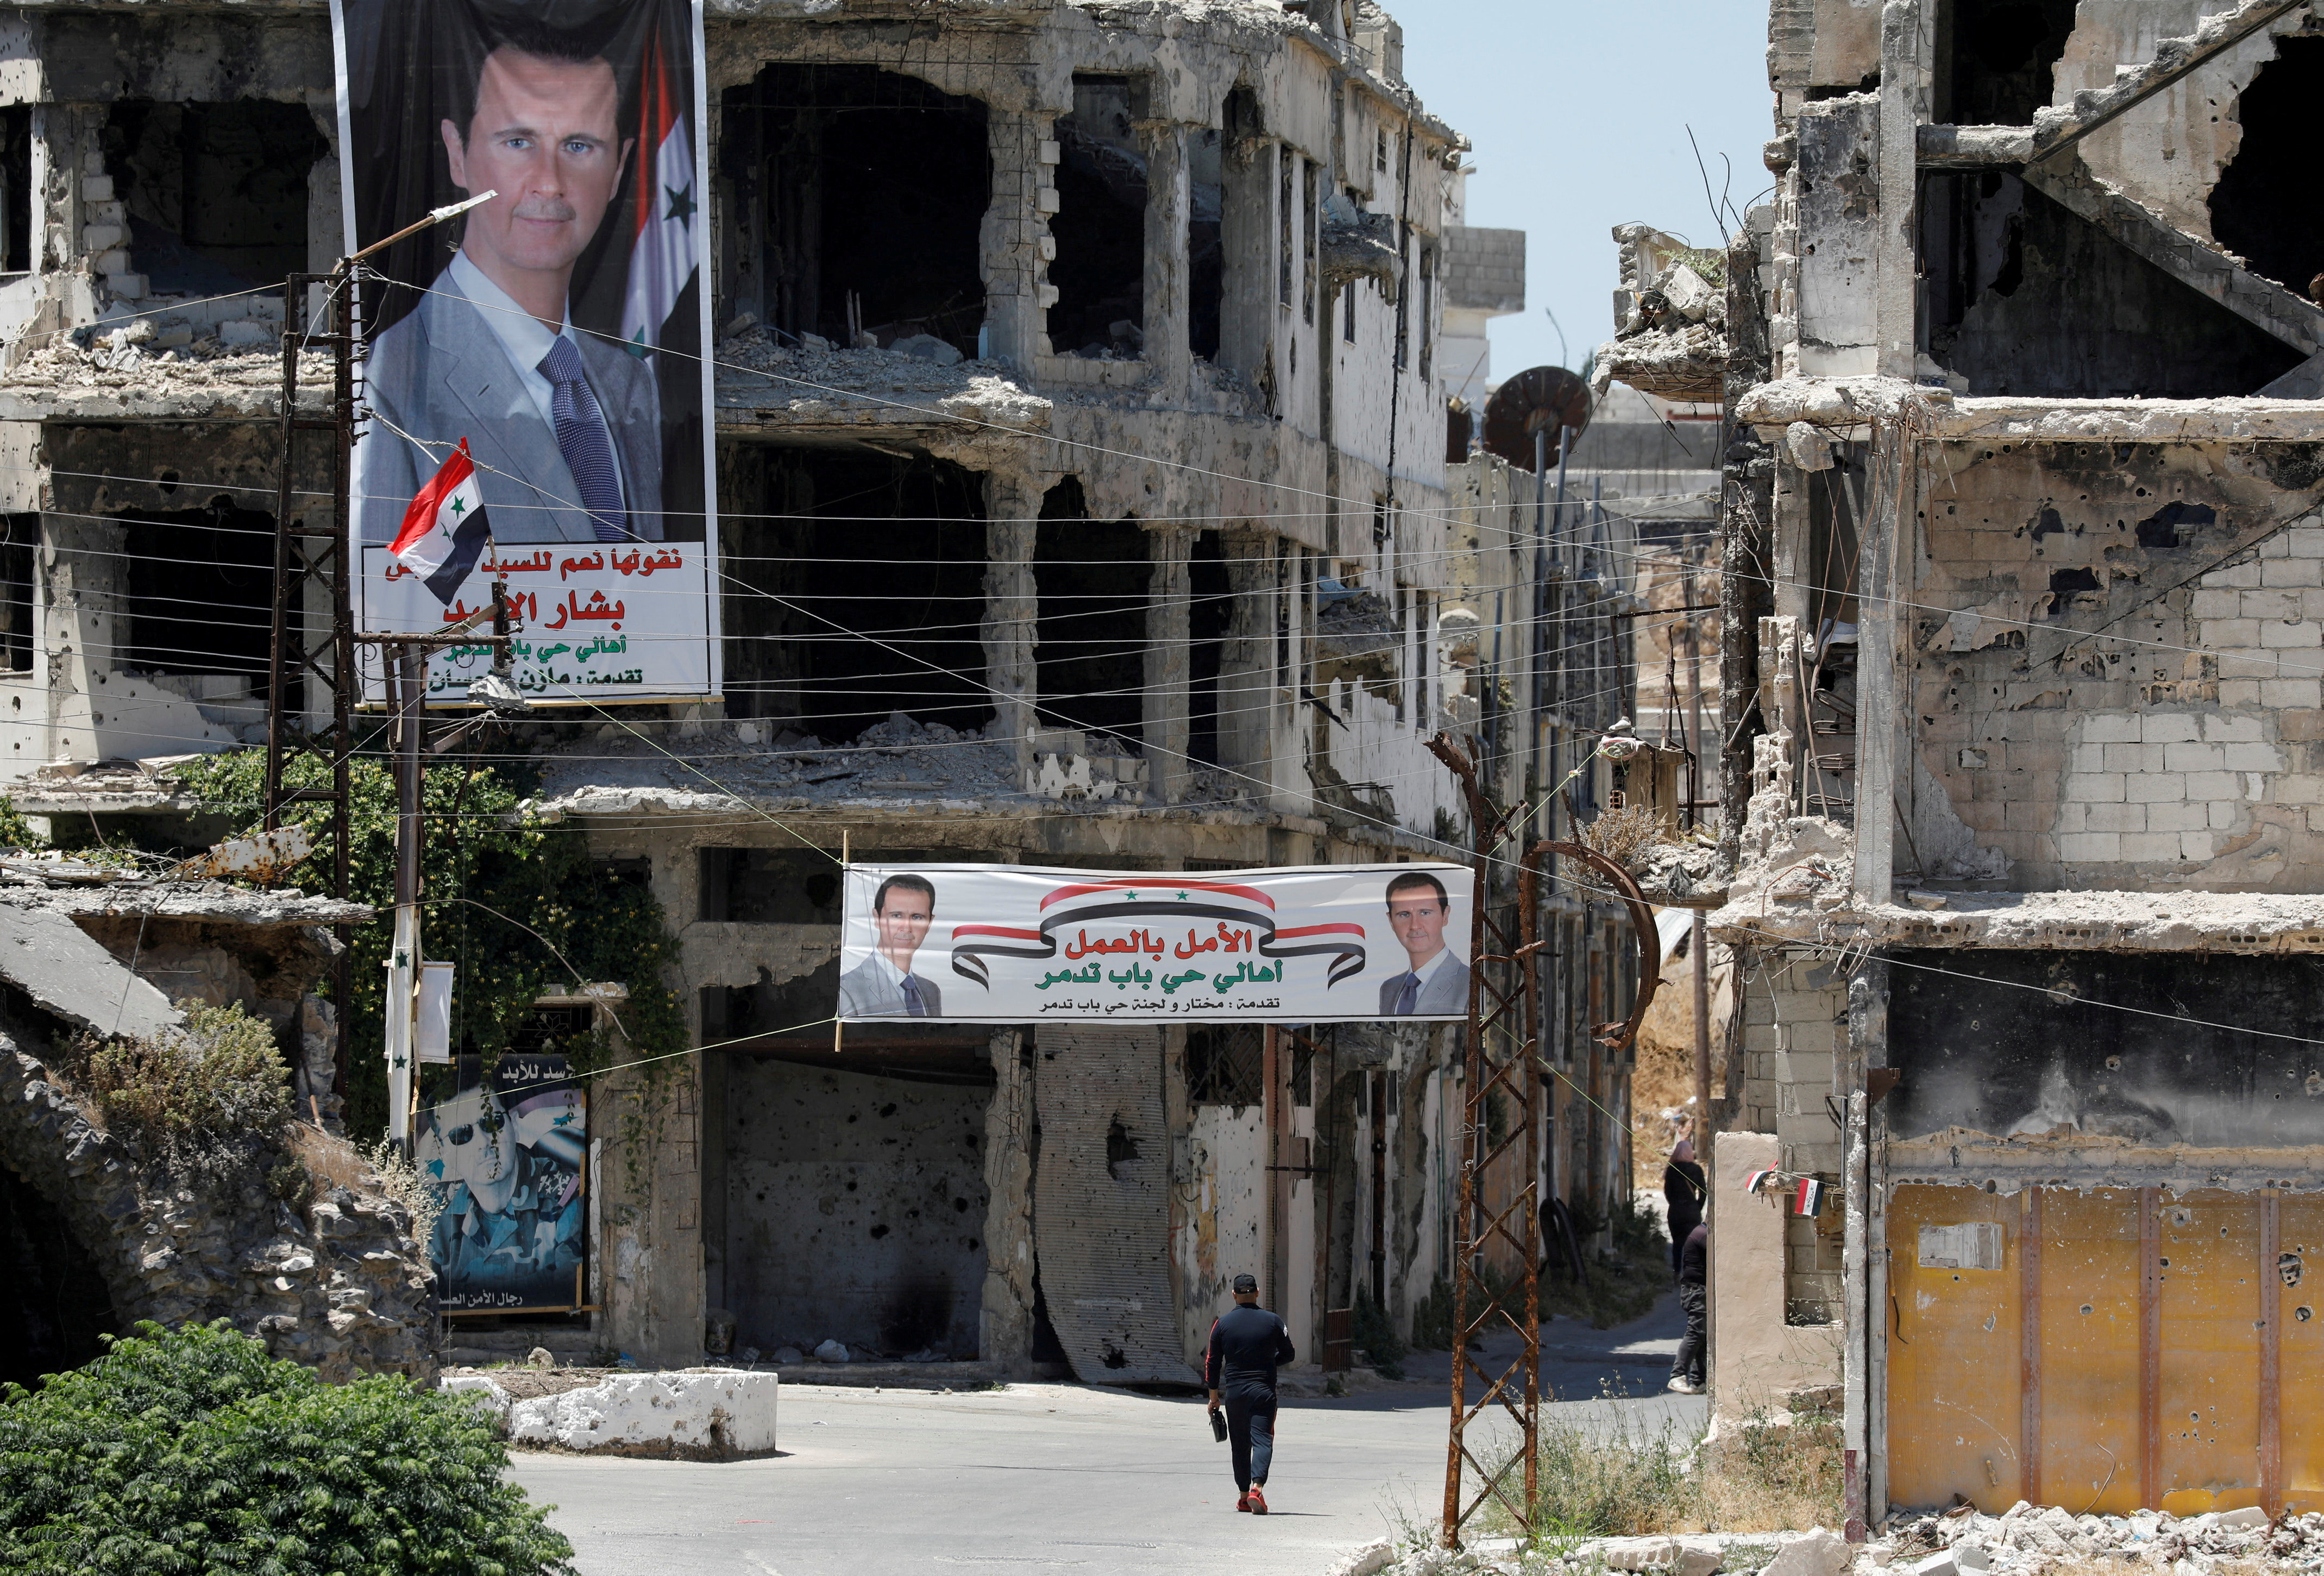 A man walks past banners depiciting Syria's President Bashar al-Assad, near damaged buildings in Homs